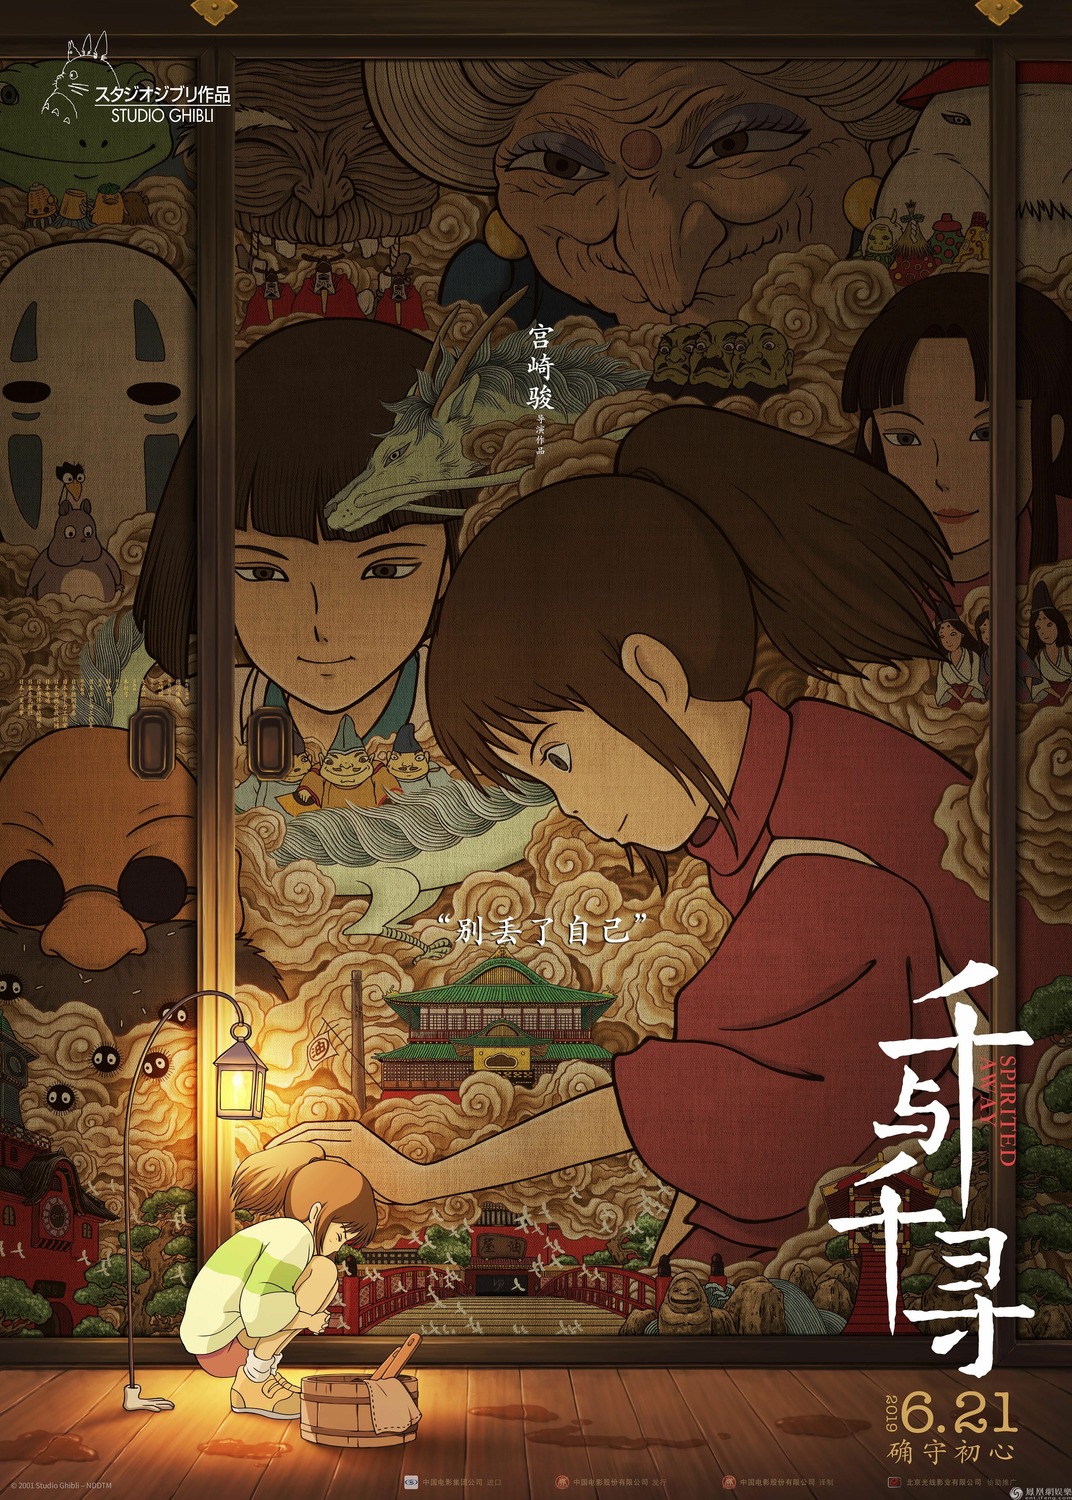 Extra Large Movie Poster Image for Spirited Away (#6 of 7)